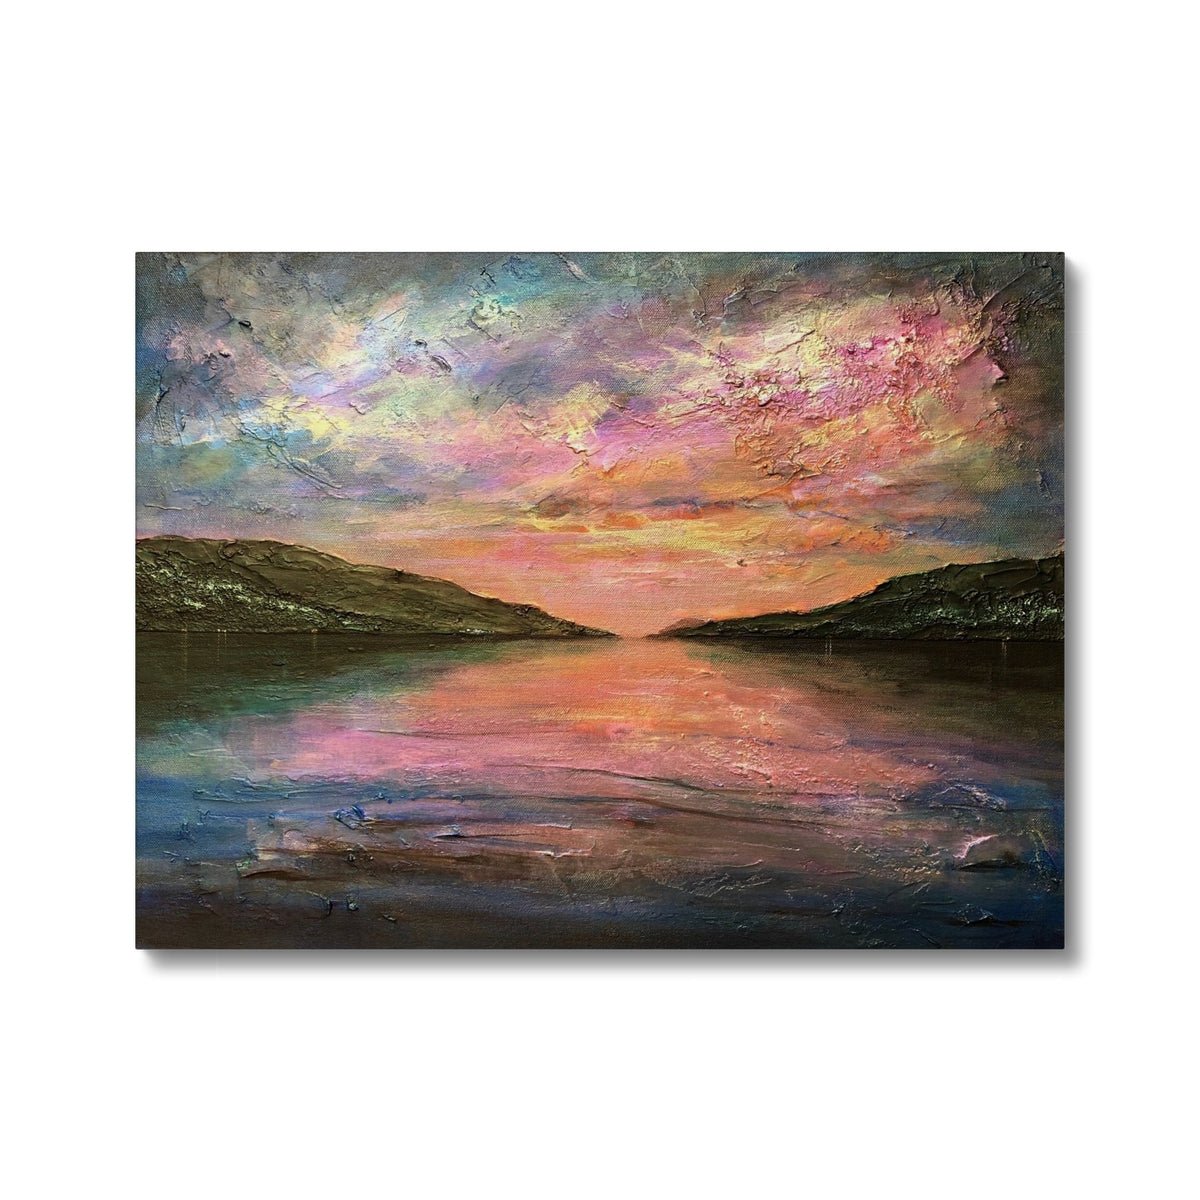 Loch Ness Dawn Painting | Canvas From Scotland-Contemporary Stretched Canvas Prints-Scottish Lochs & Mountains Art Gallery-24"x18"-Paintings, Prints, Homeware, Art Gifts From Scotland By Scottish Artist Kevin Hunter